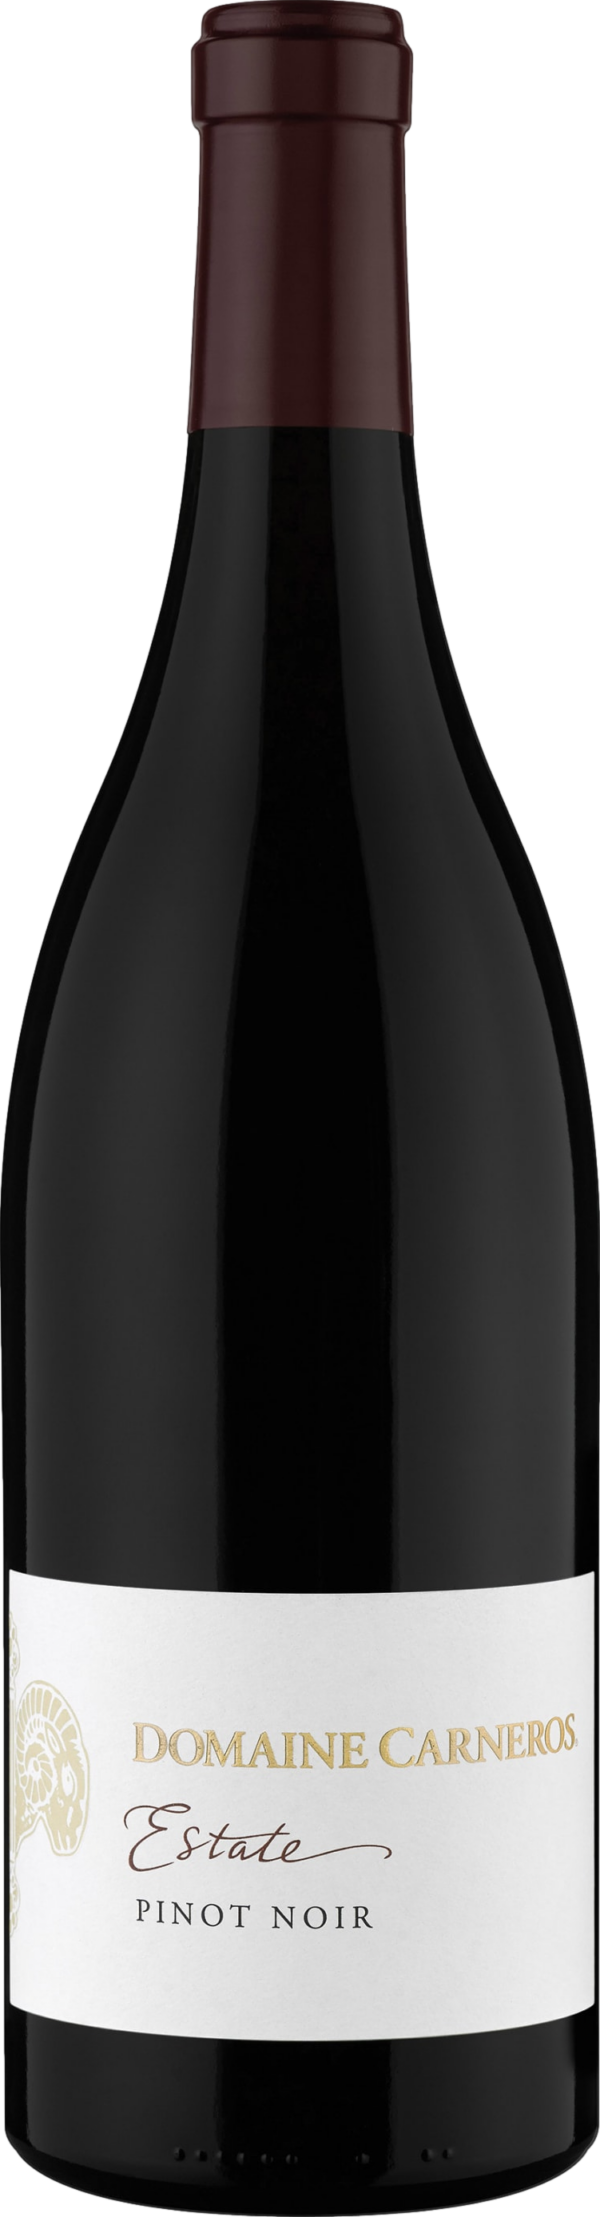 Product image of Domaine Carneros Pinot Noir 2019 from 8wines